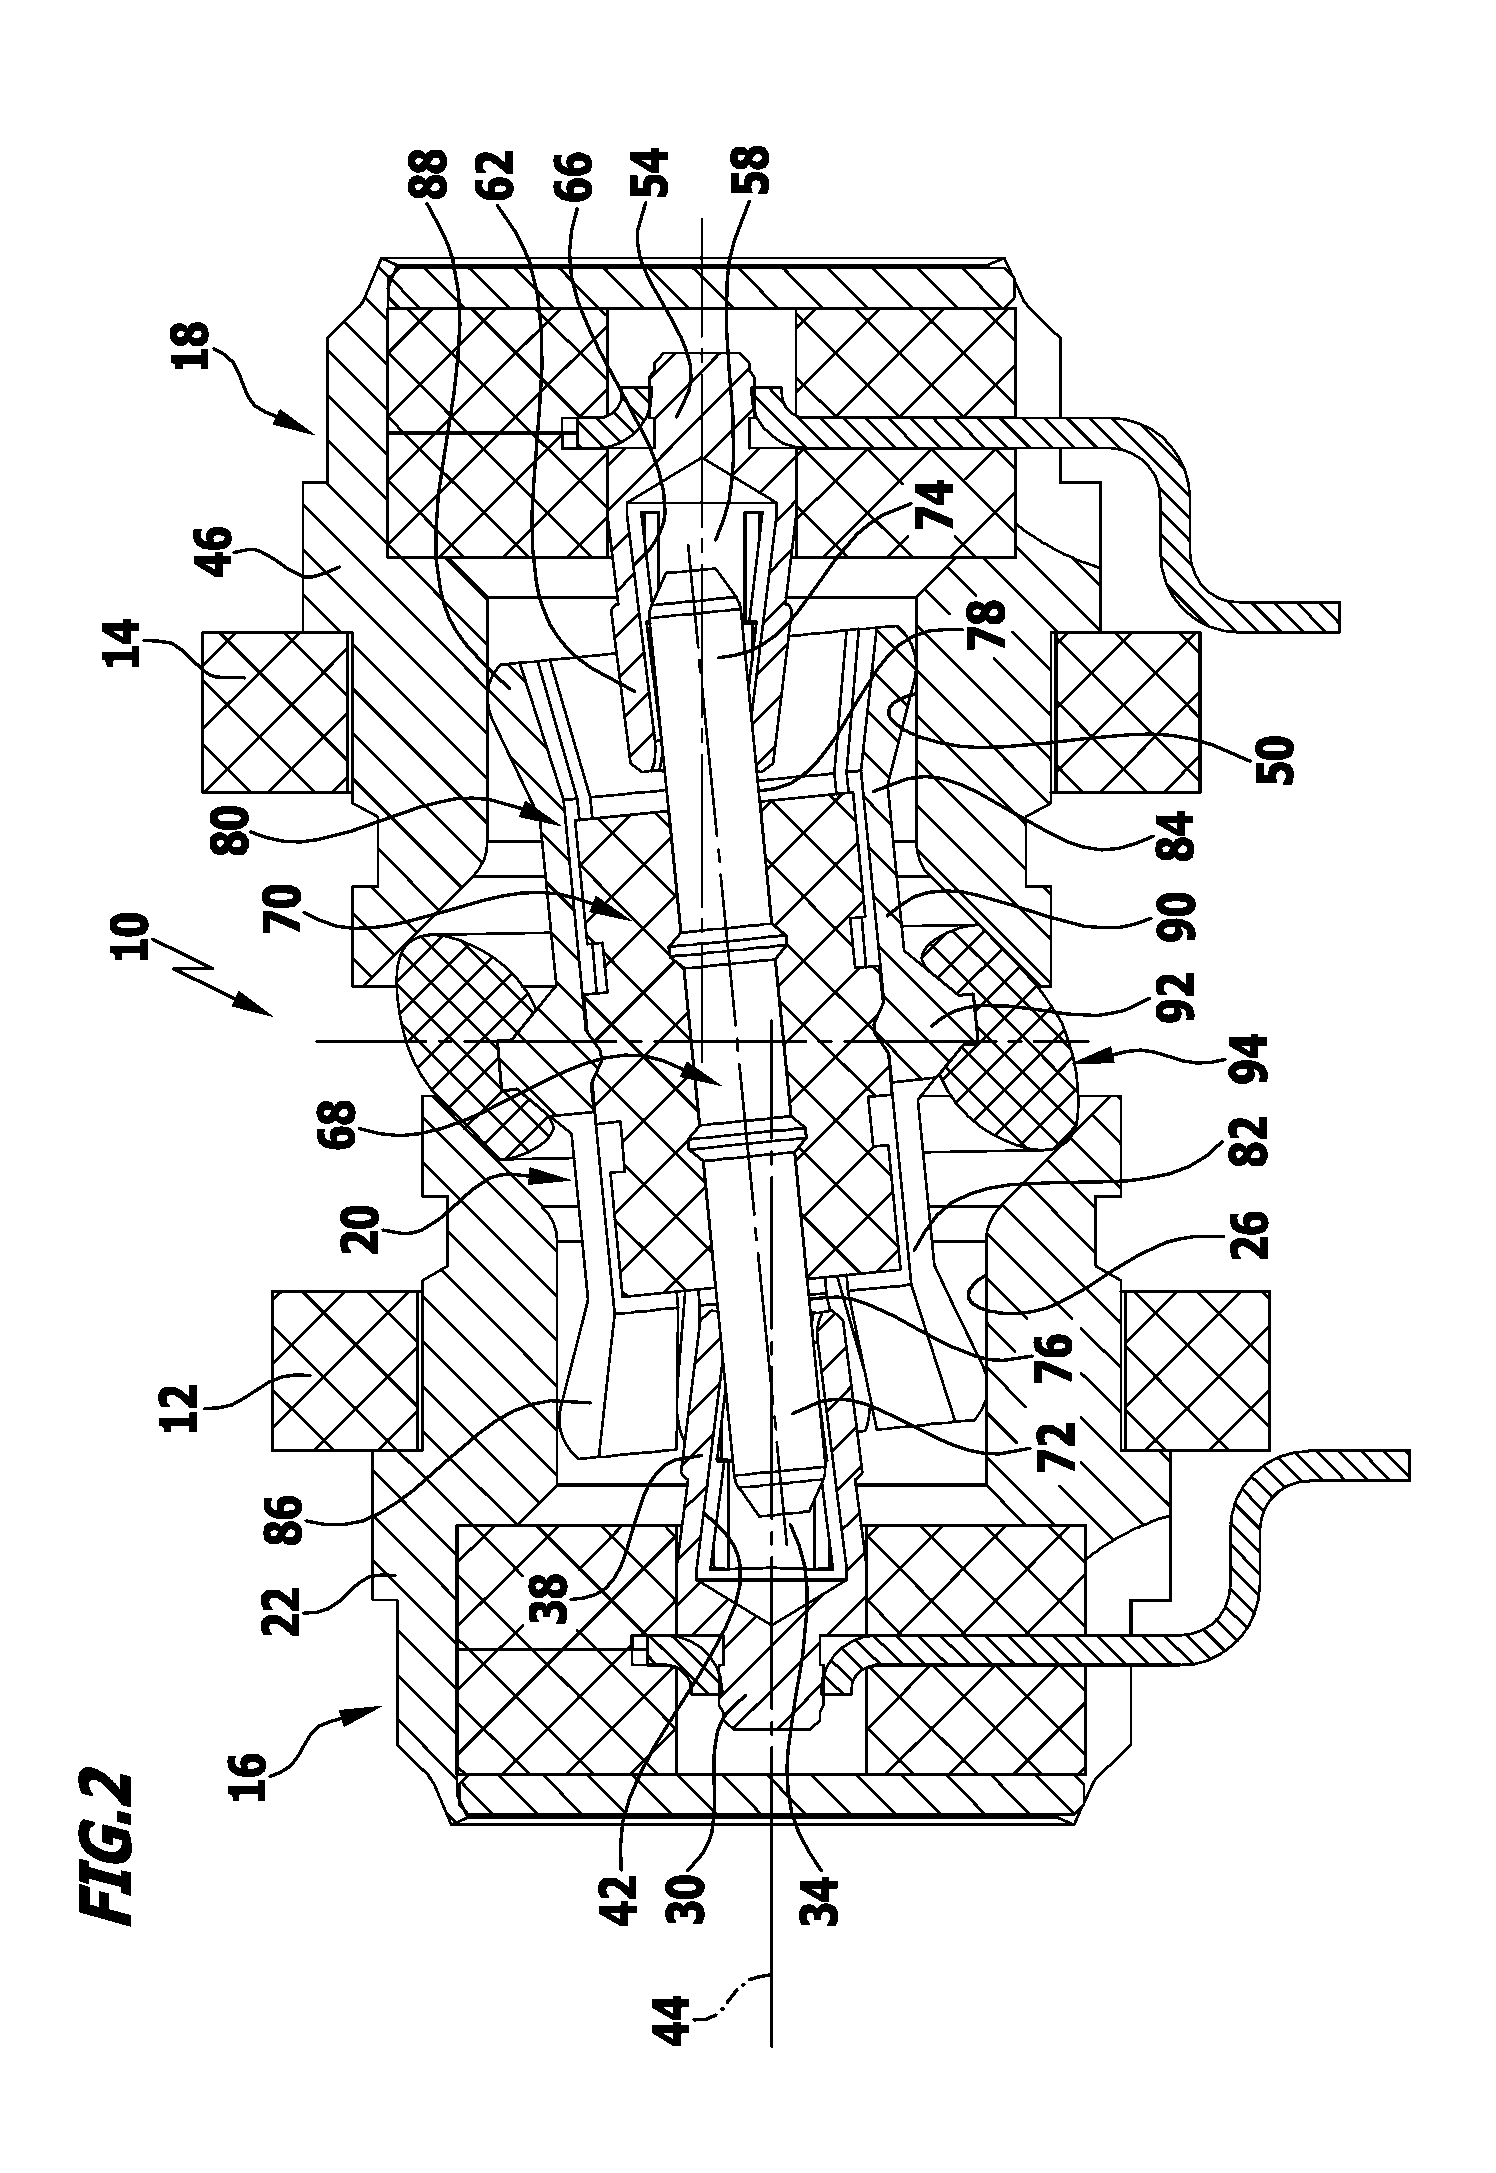 Connecting device for electrically connecting two circuit boards